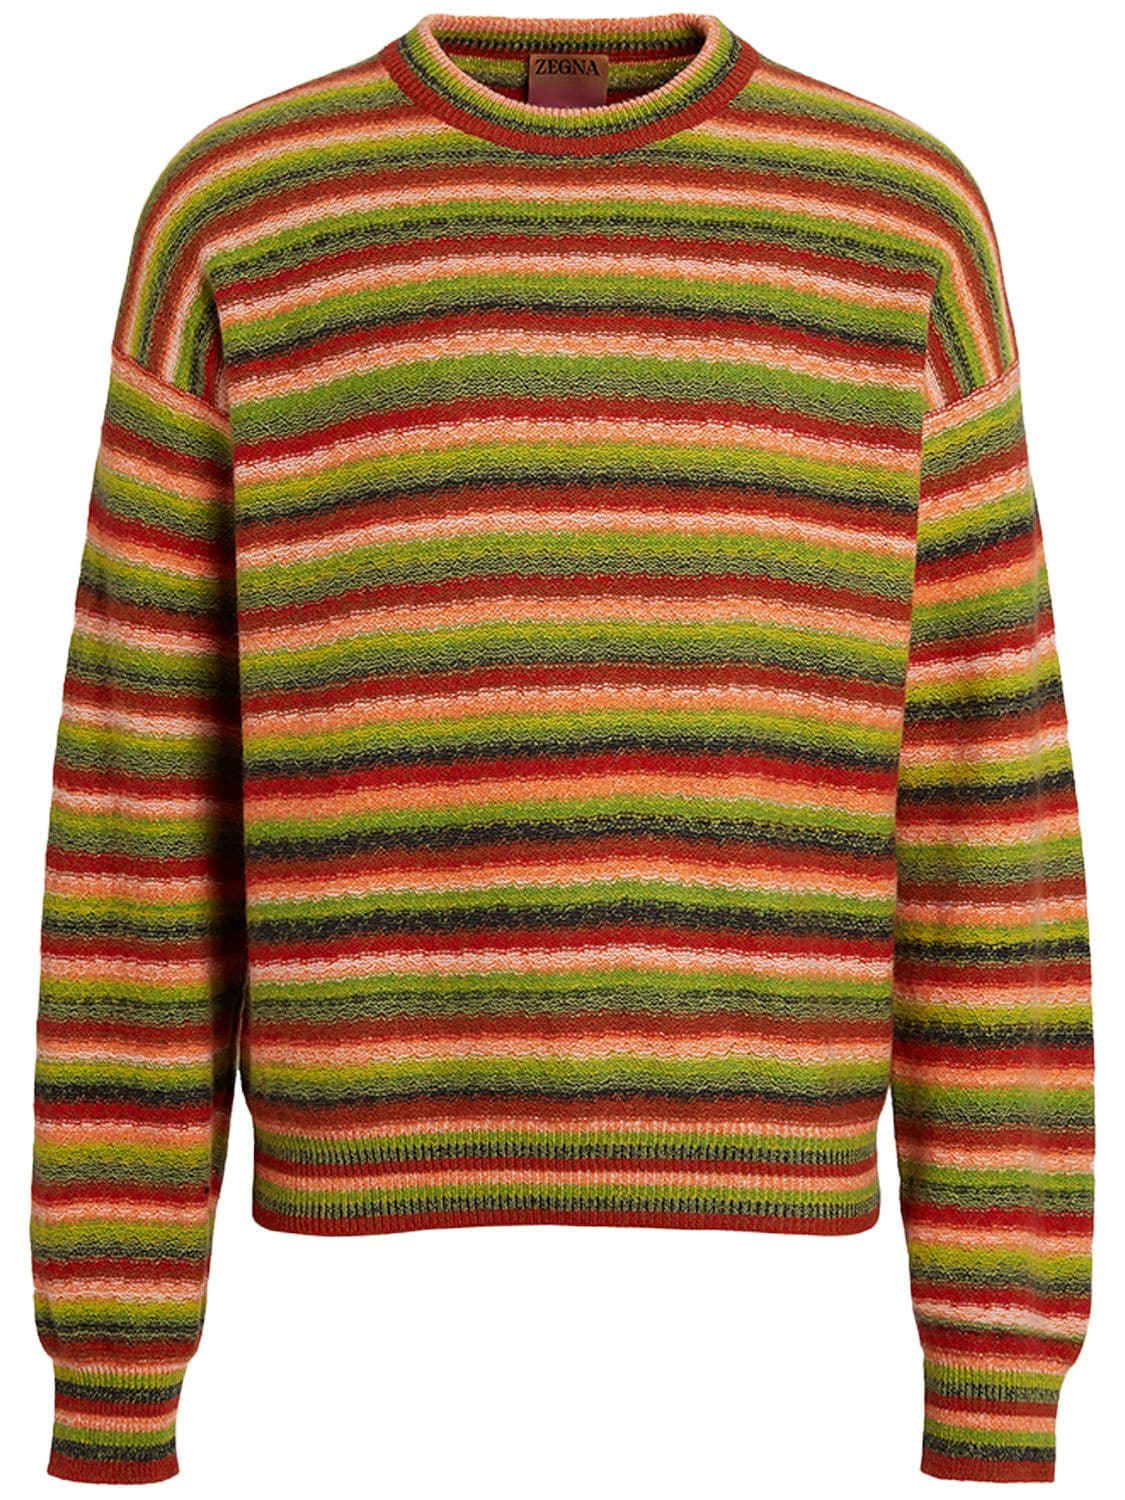 Image of Striped Cashmere & Wool Crewneck Sweater